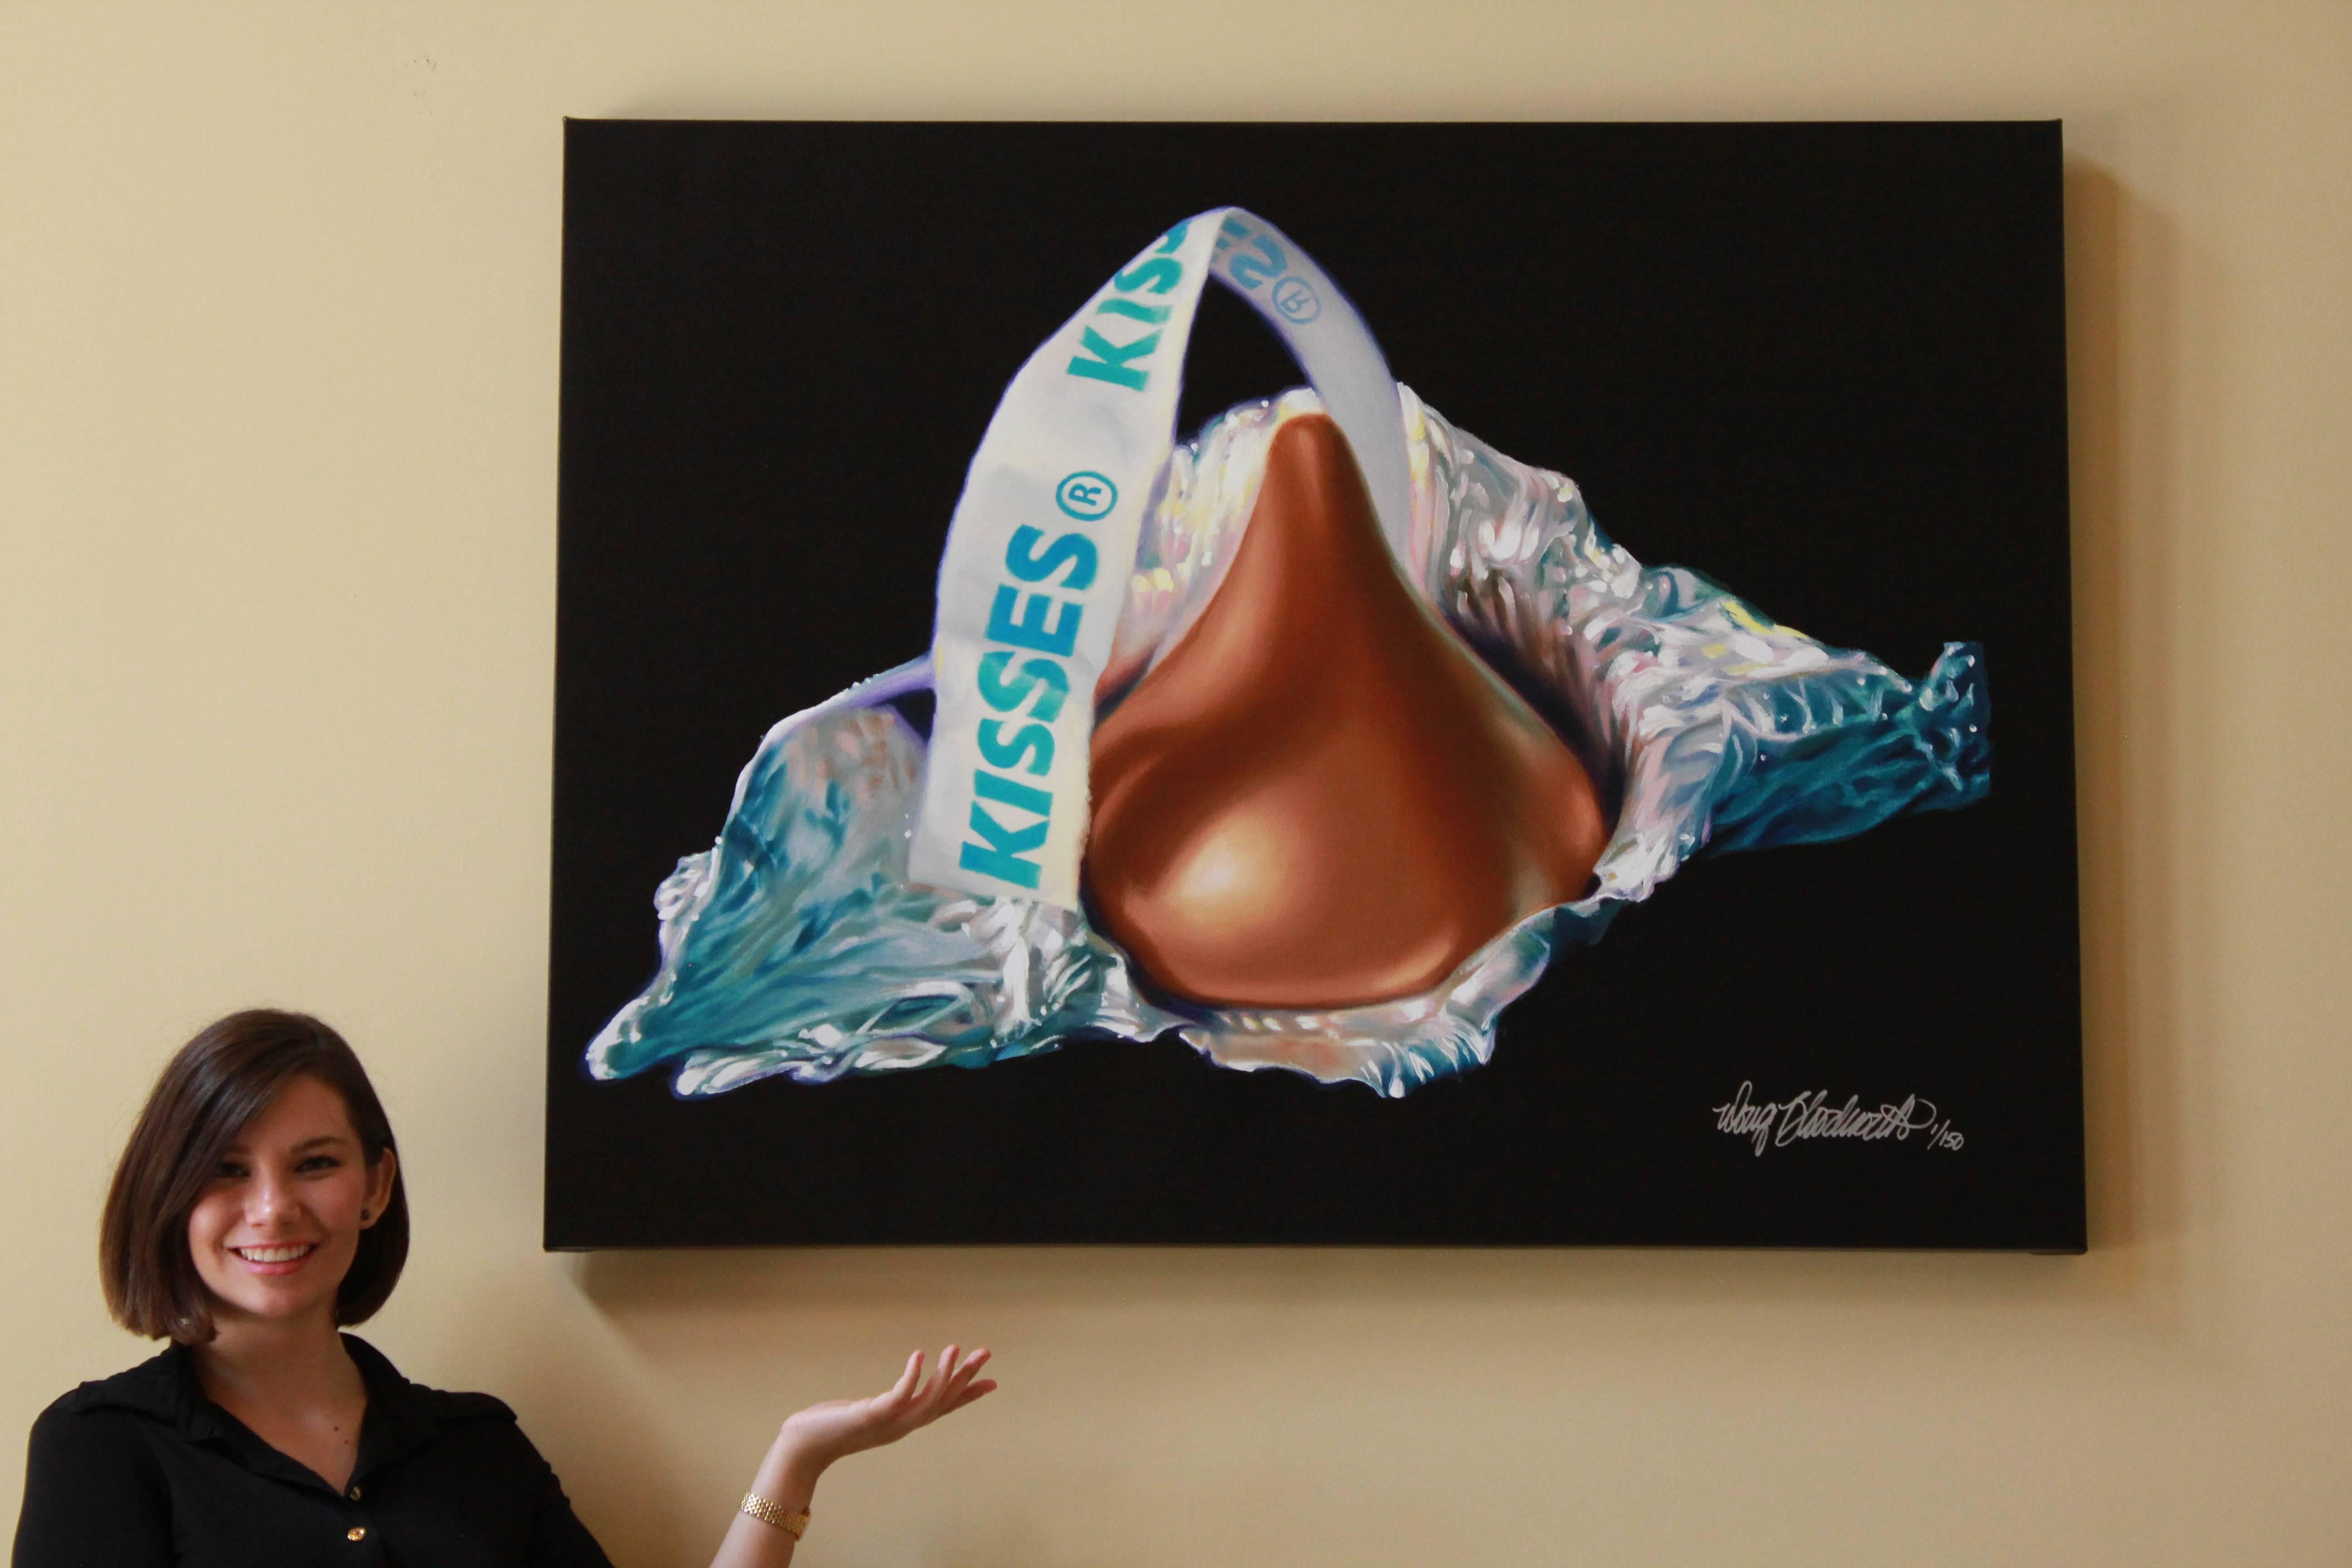 I assume if you have gotten to this page, you are probably a Hershey's Kisses fanatic. Either that or you are a dentist looking for something to put on the walls of your office.

This is not a photo. It is a limited edition reproduction on canvas